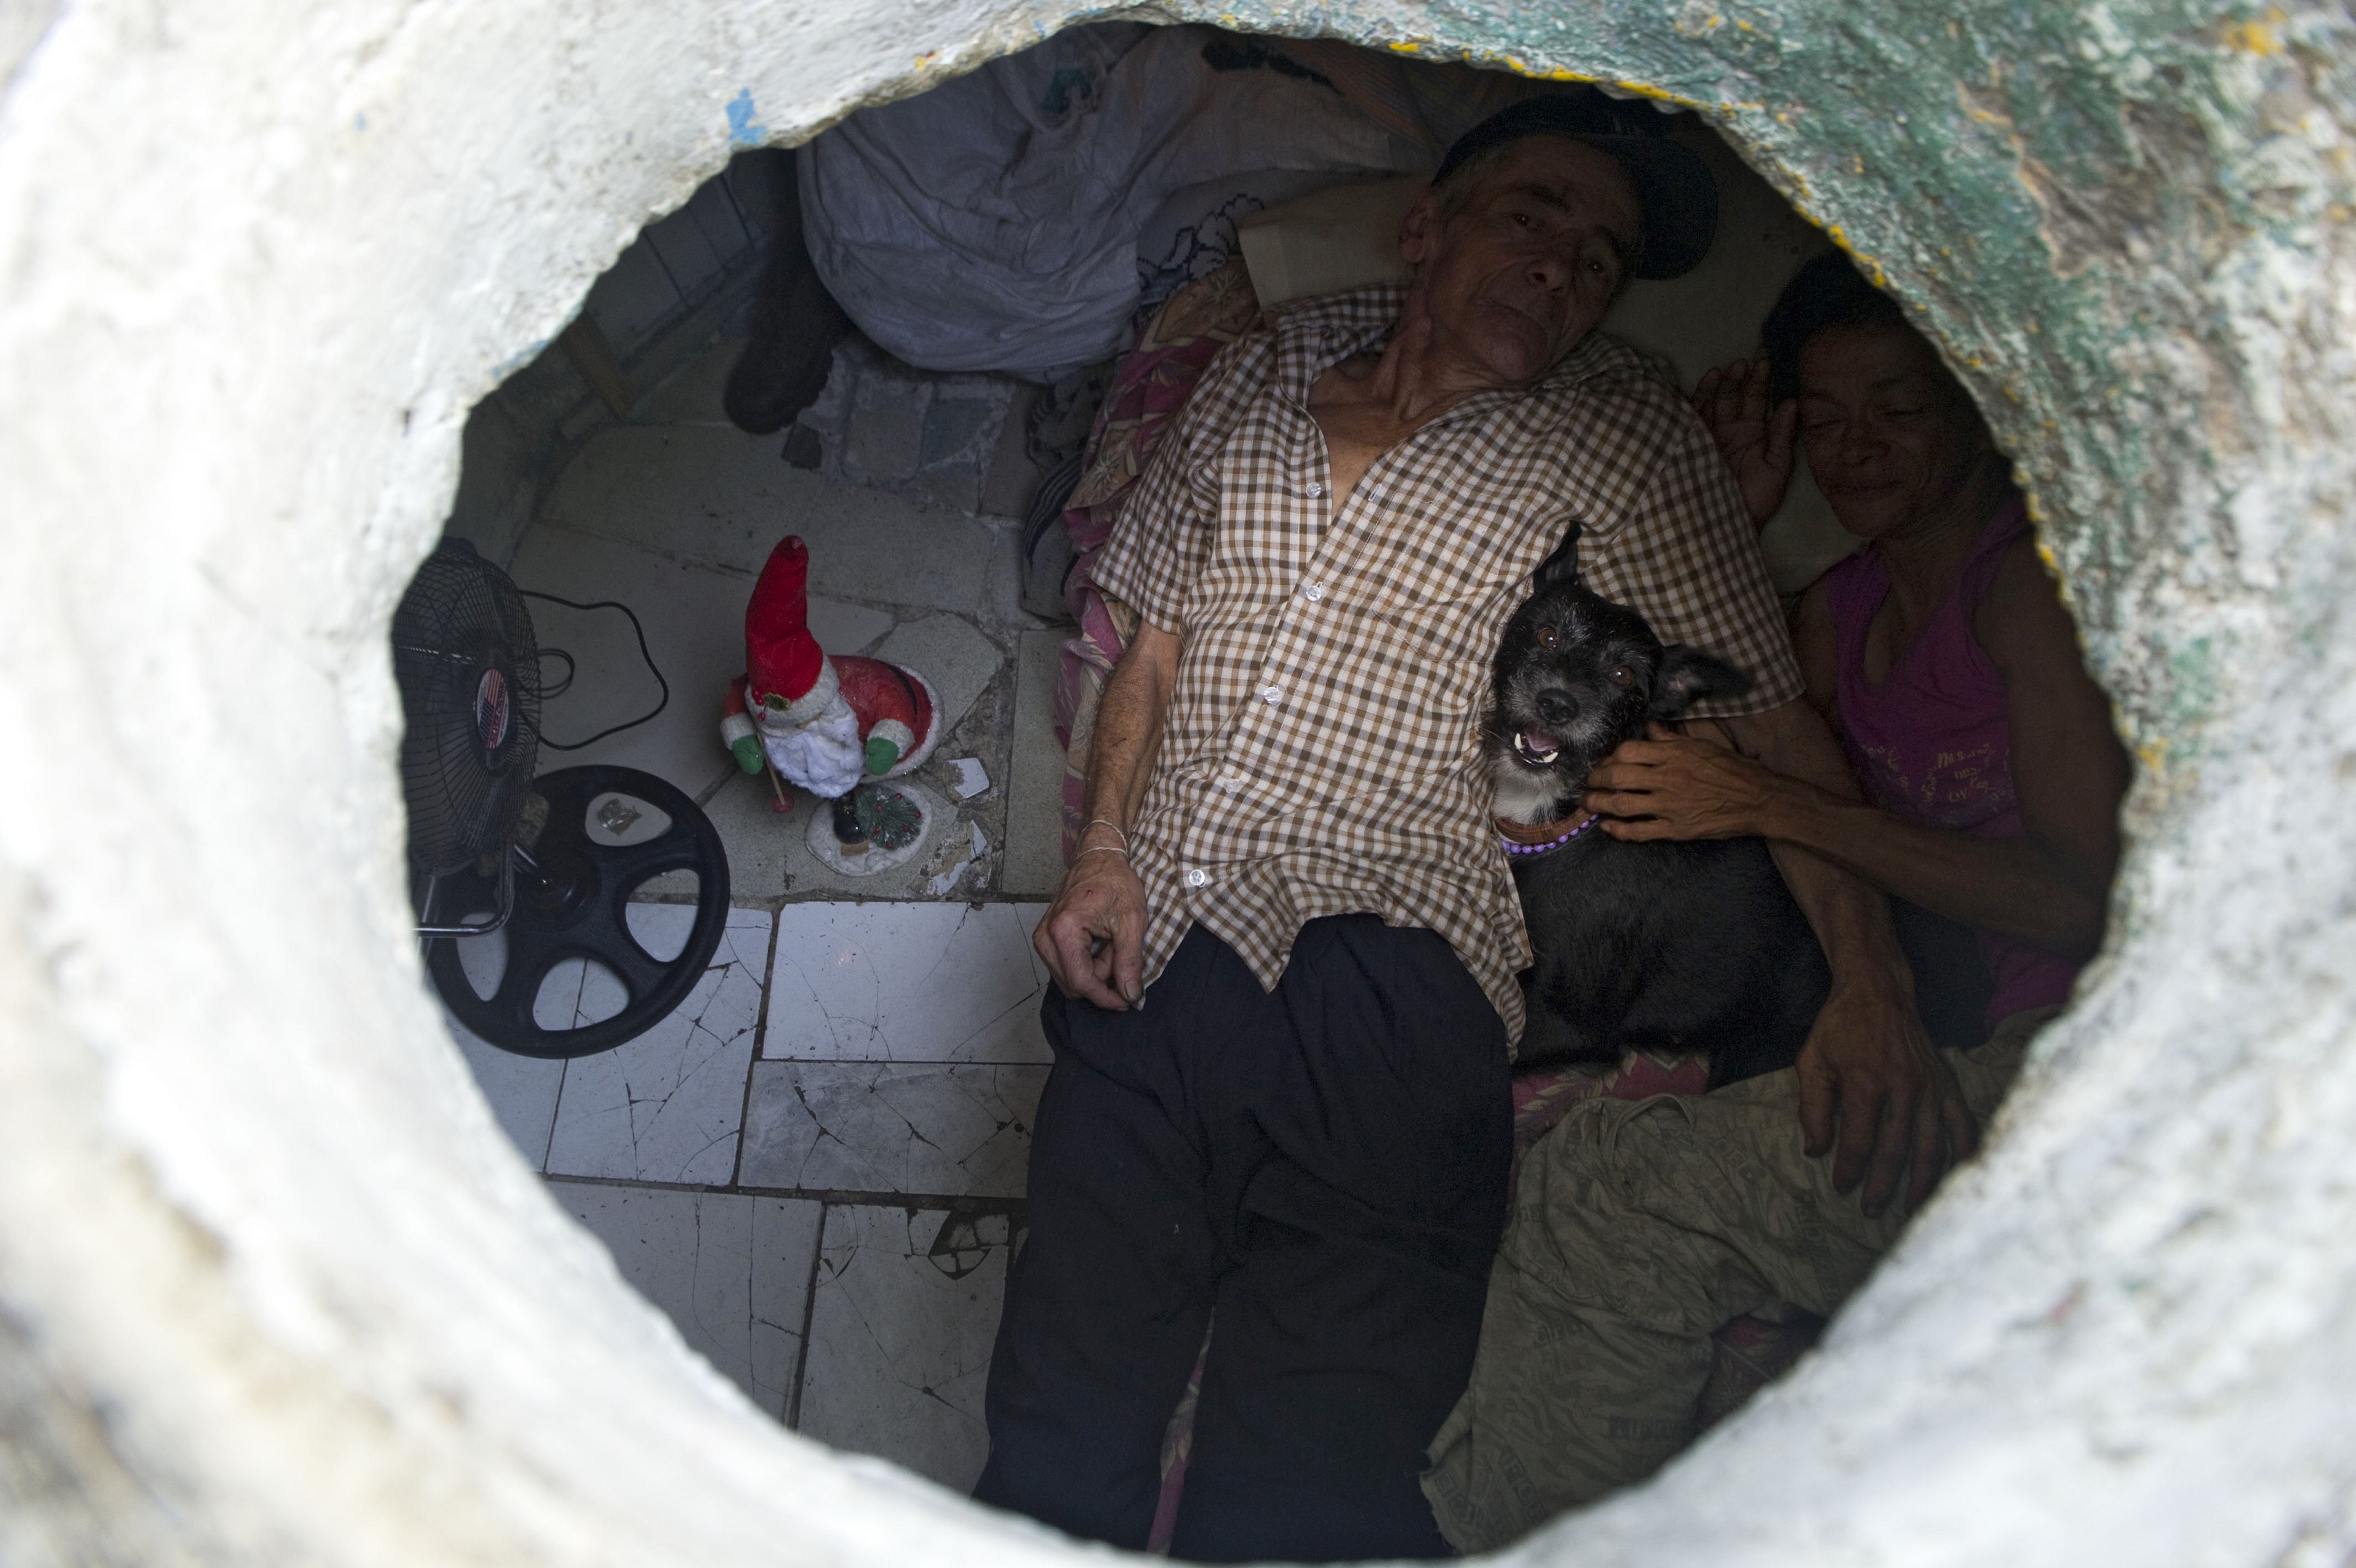 Couple living in Sewer for 22 years